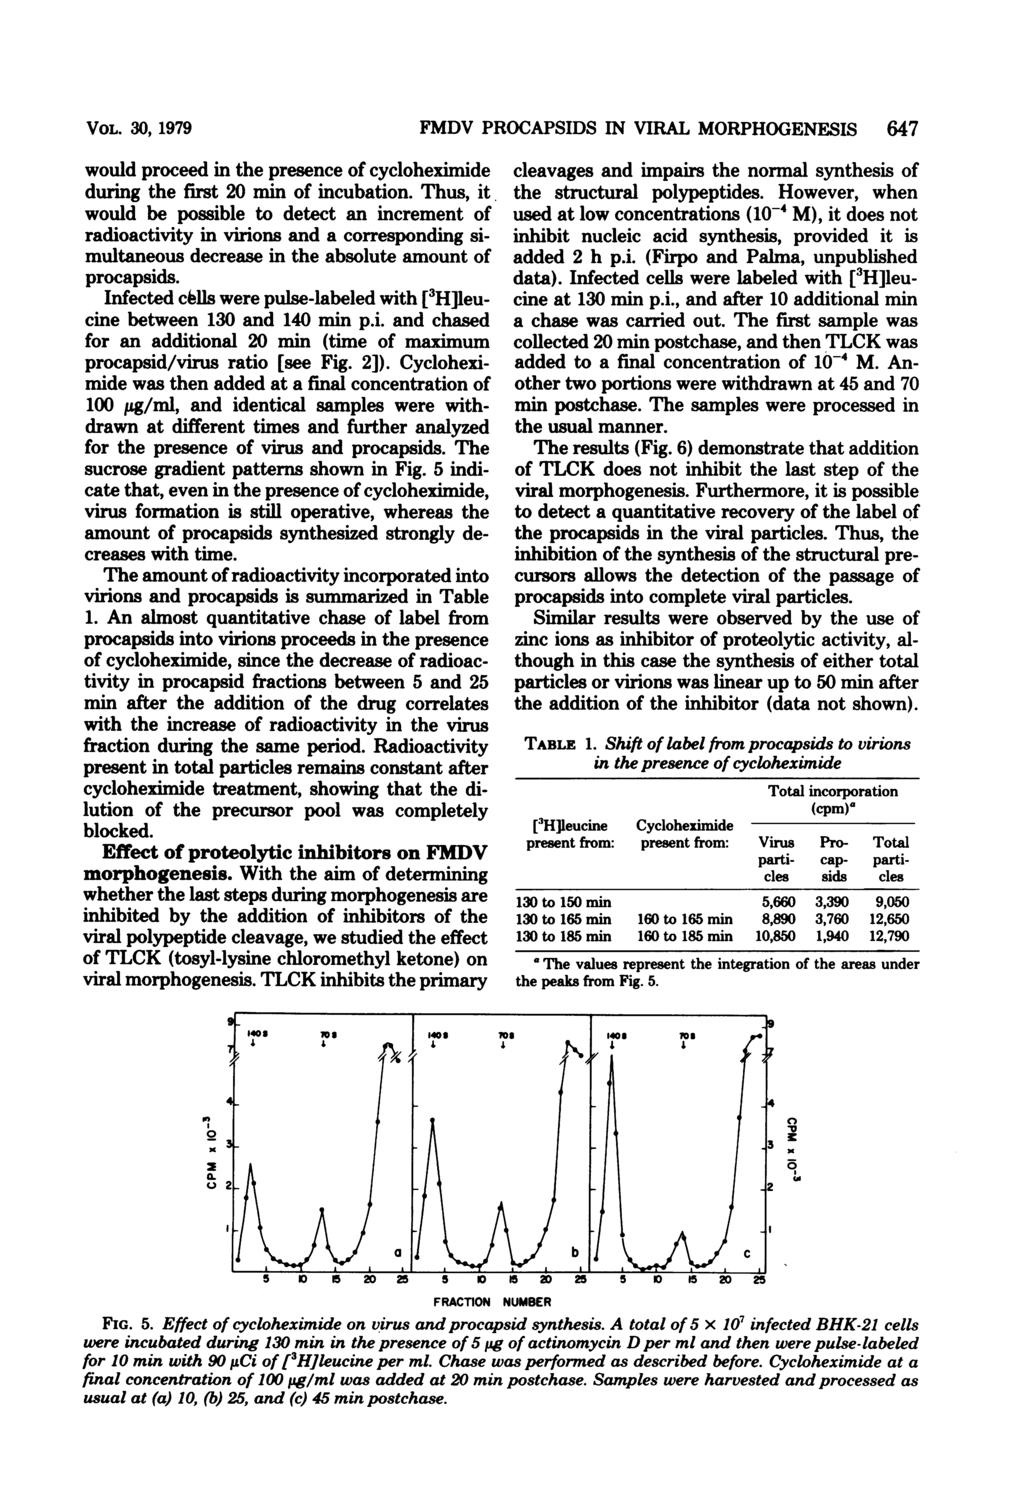 VOL. 3, 1979 would proceed in the presence of cycloheximide during the first 2 min of incubation.